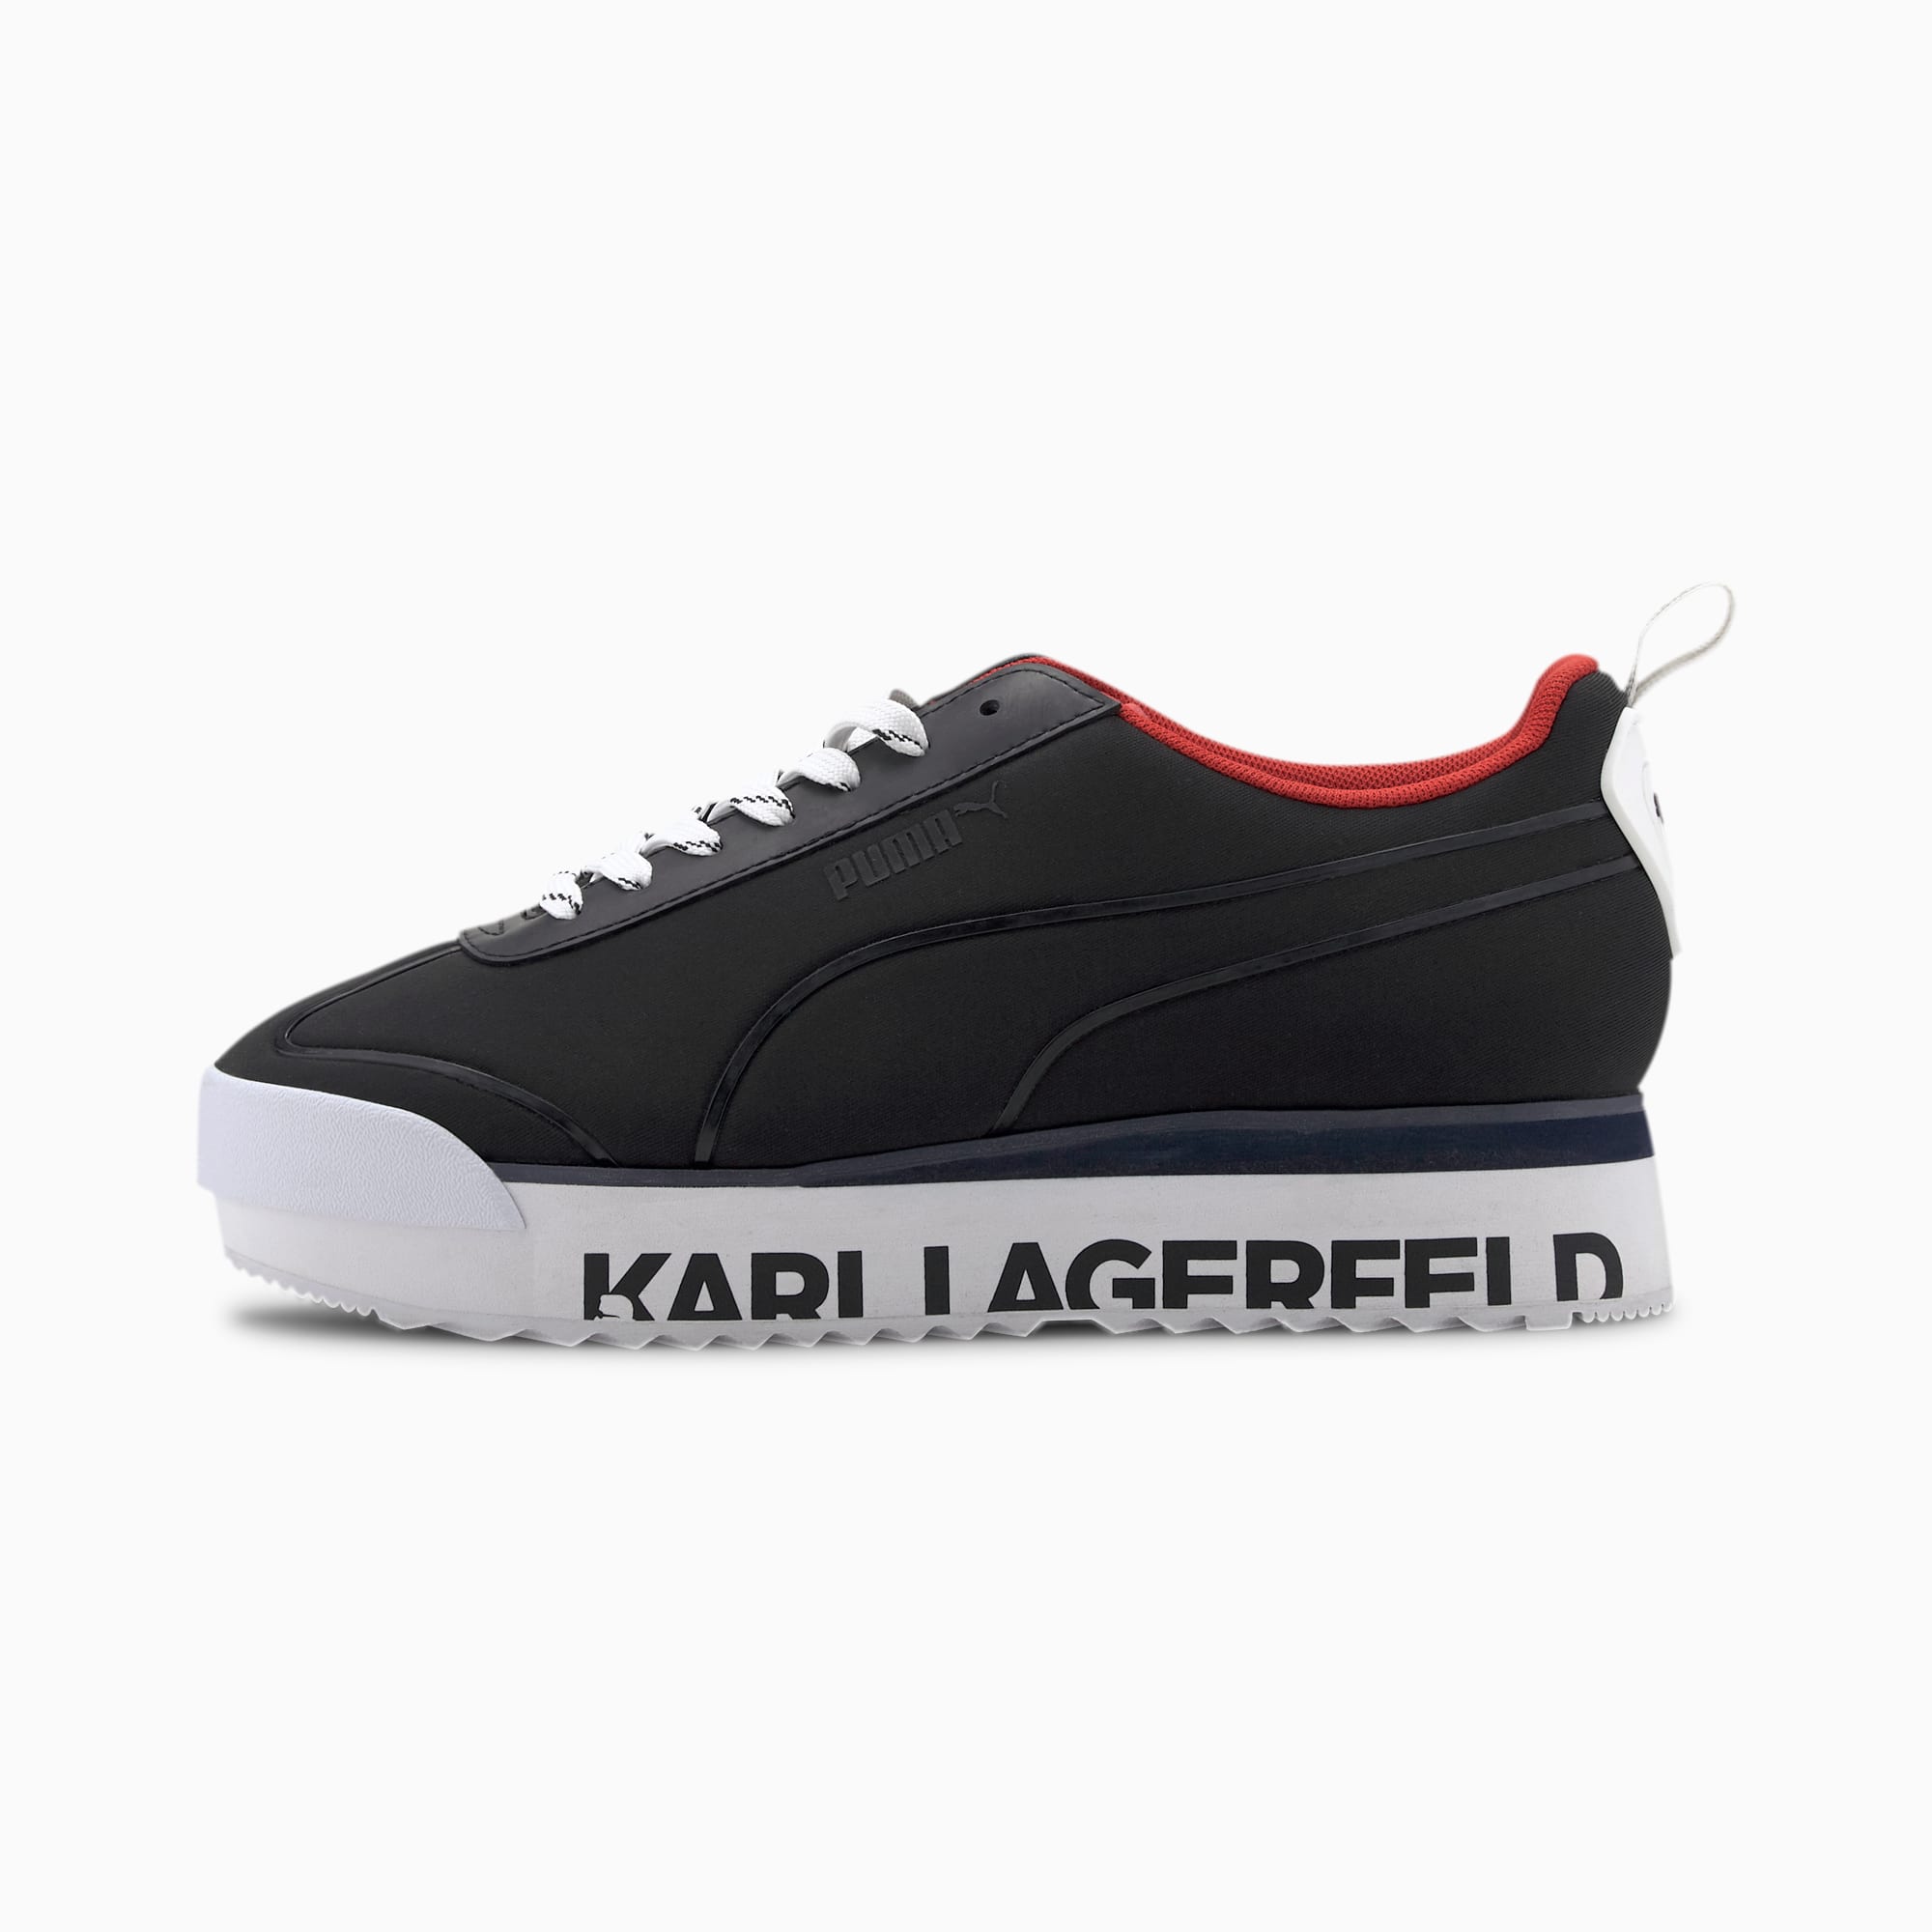 karl lagerfeld shoes